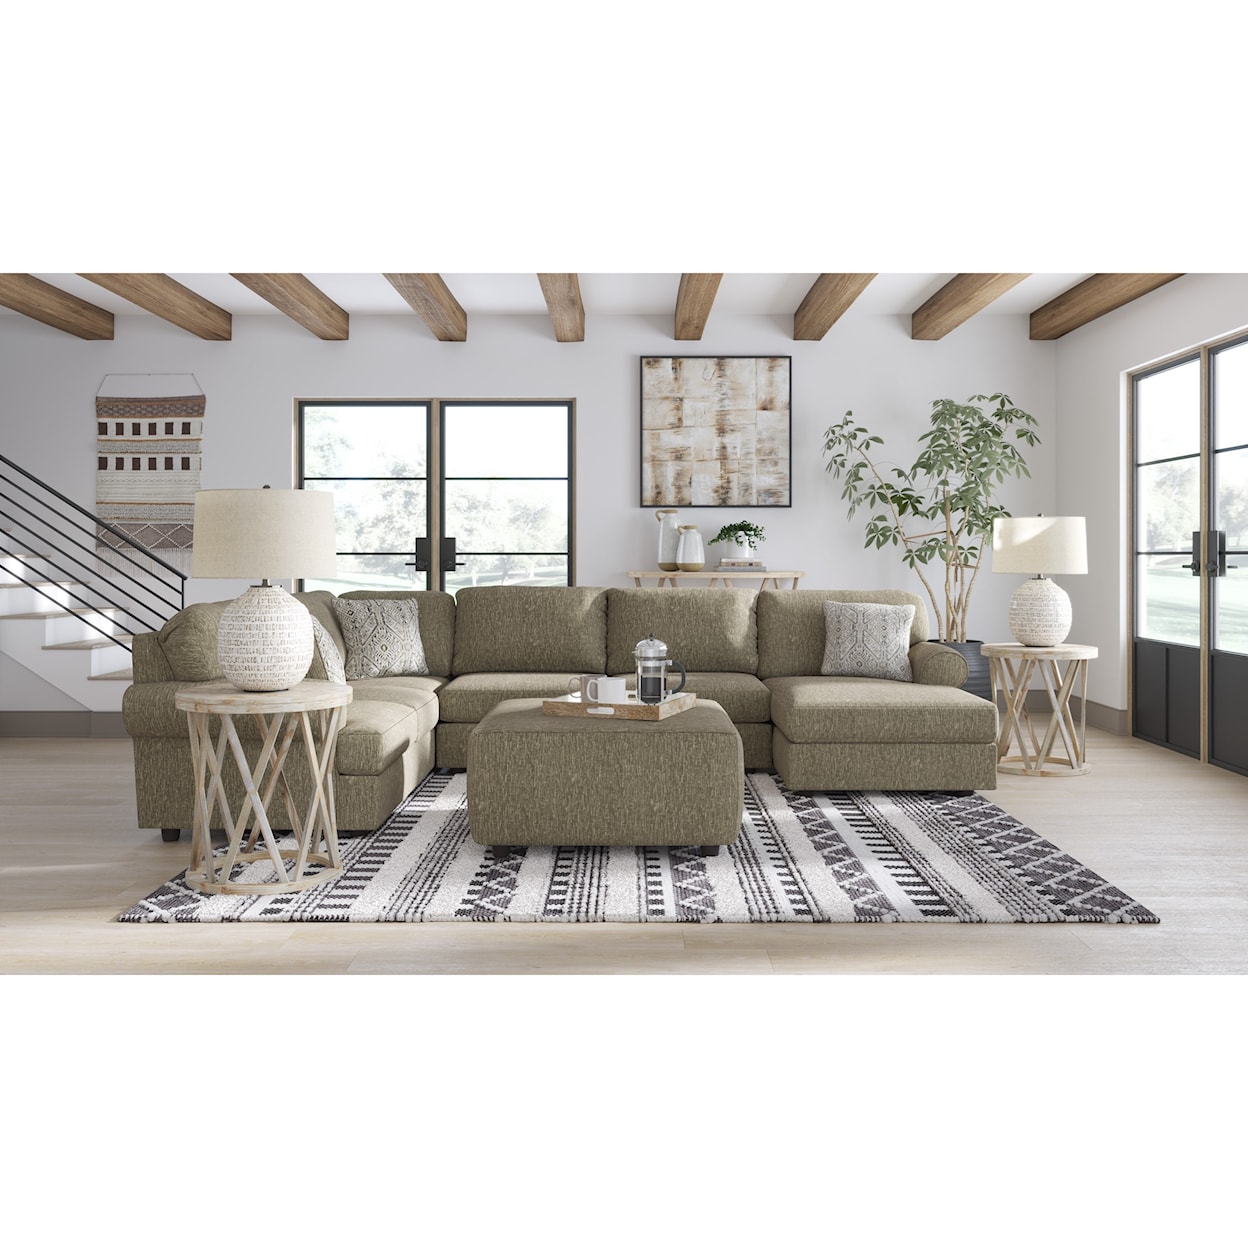 Benchcraft Hoylake 3-Piece Sectional with Chaise